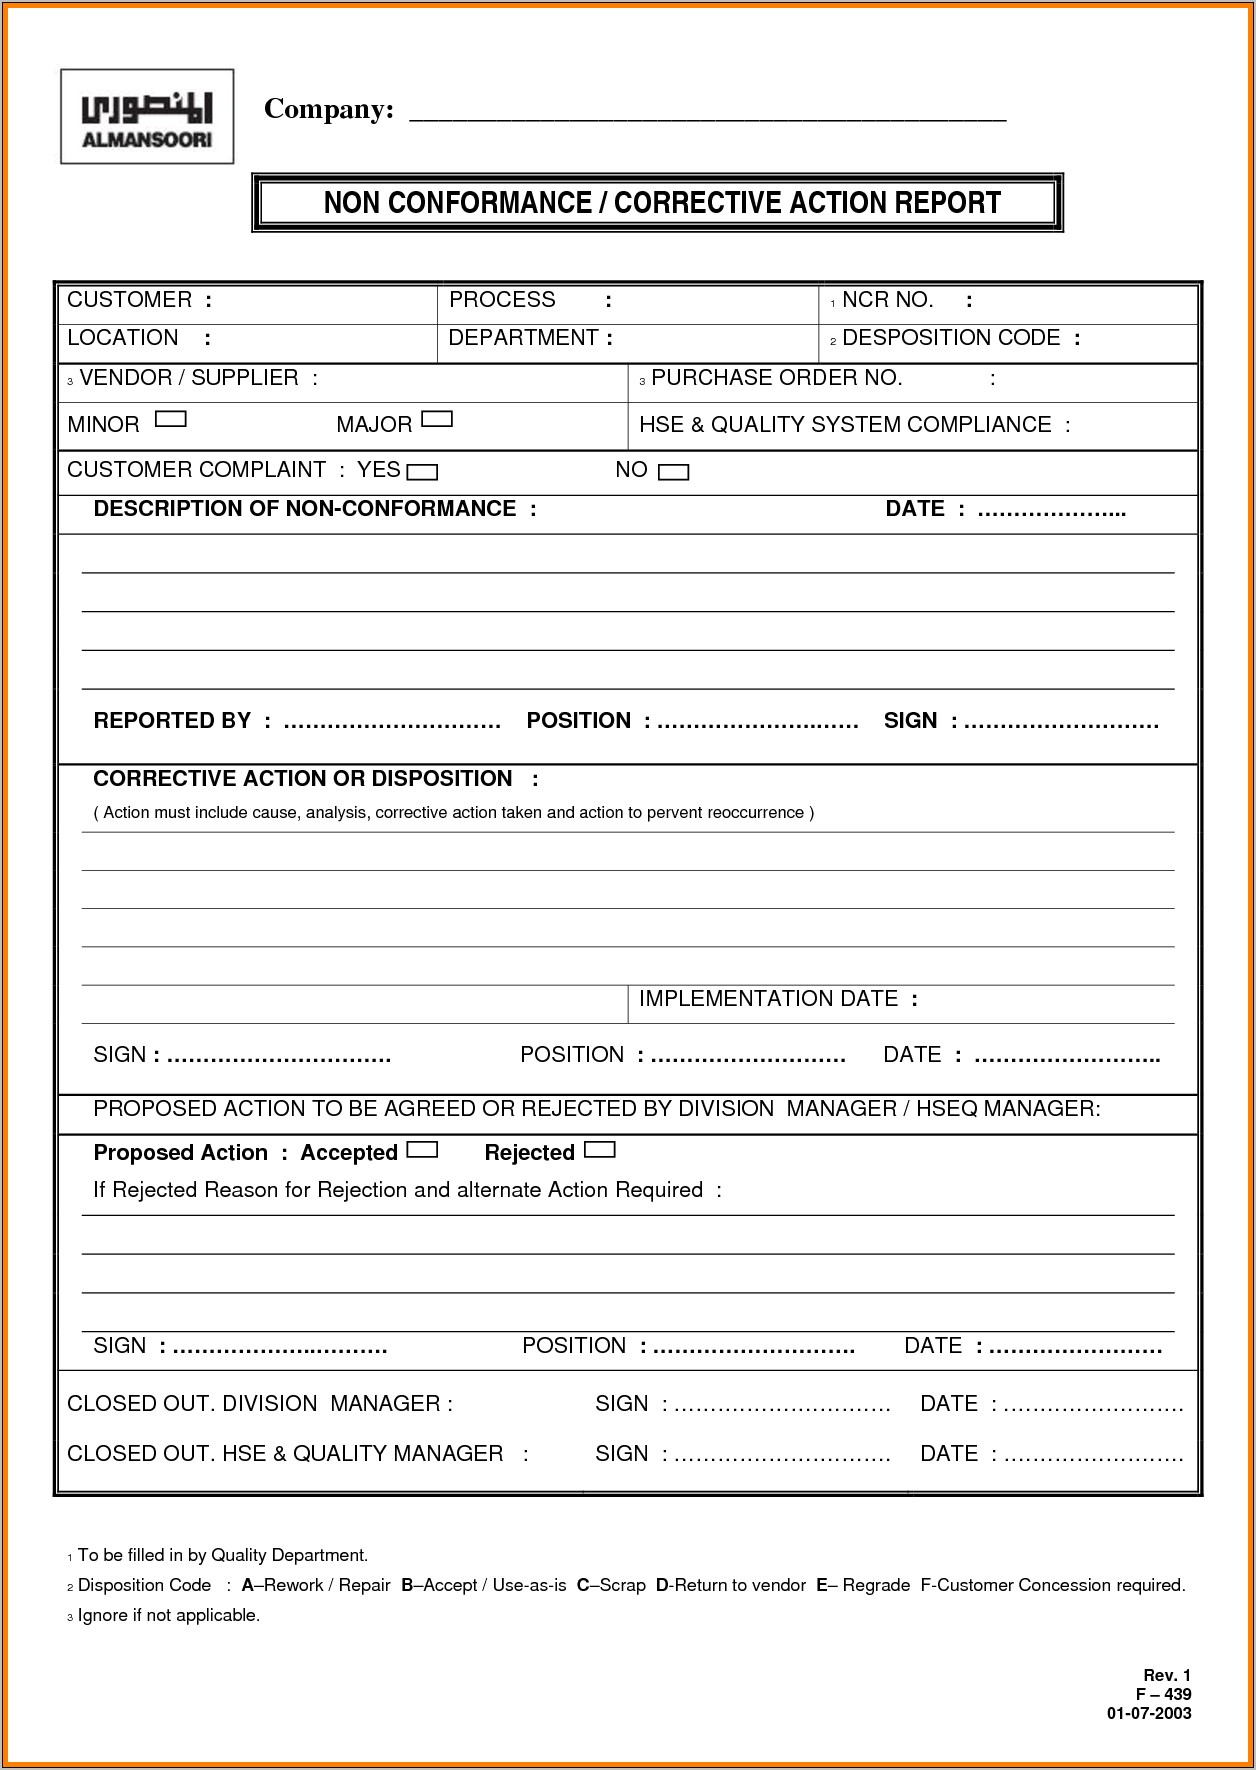 Sample Corrective Action Report Form